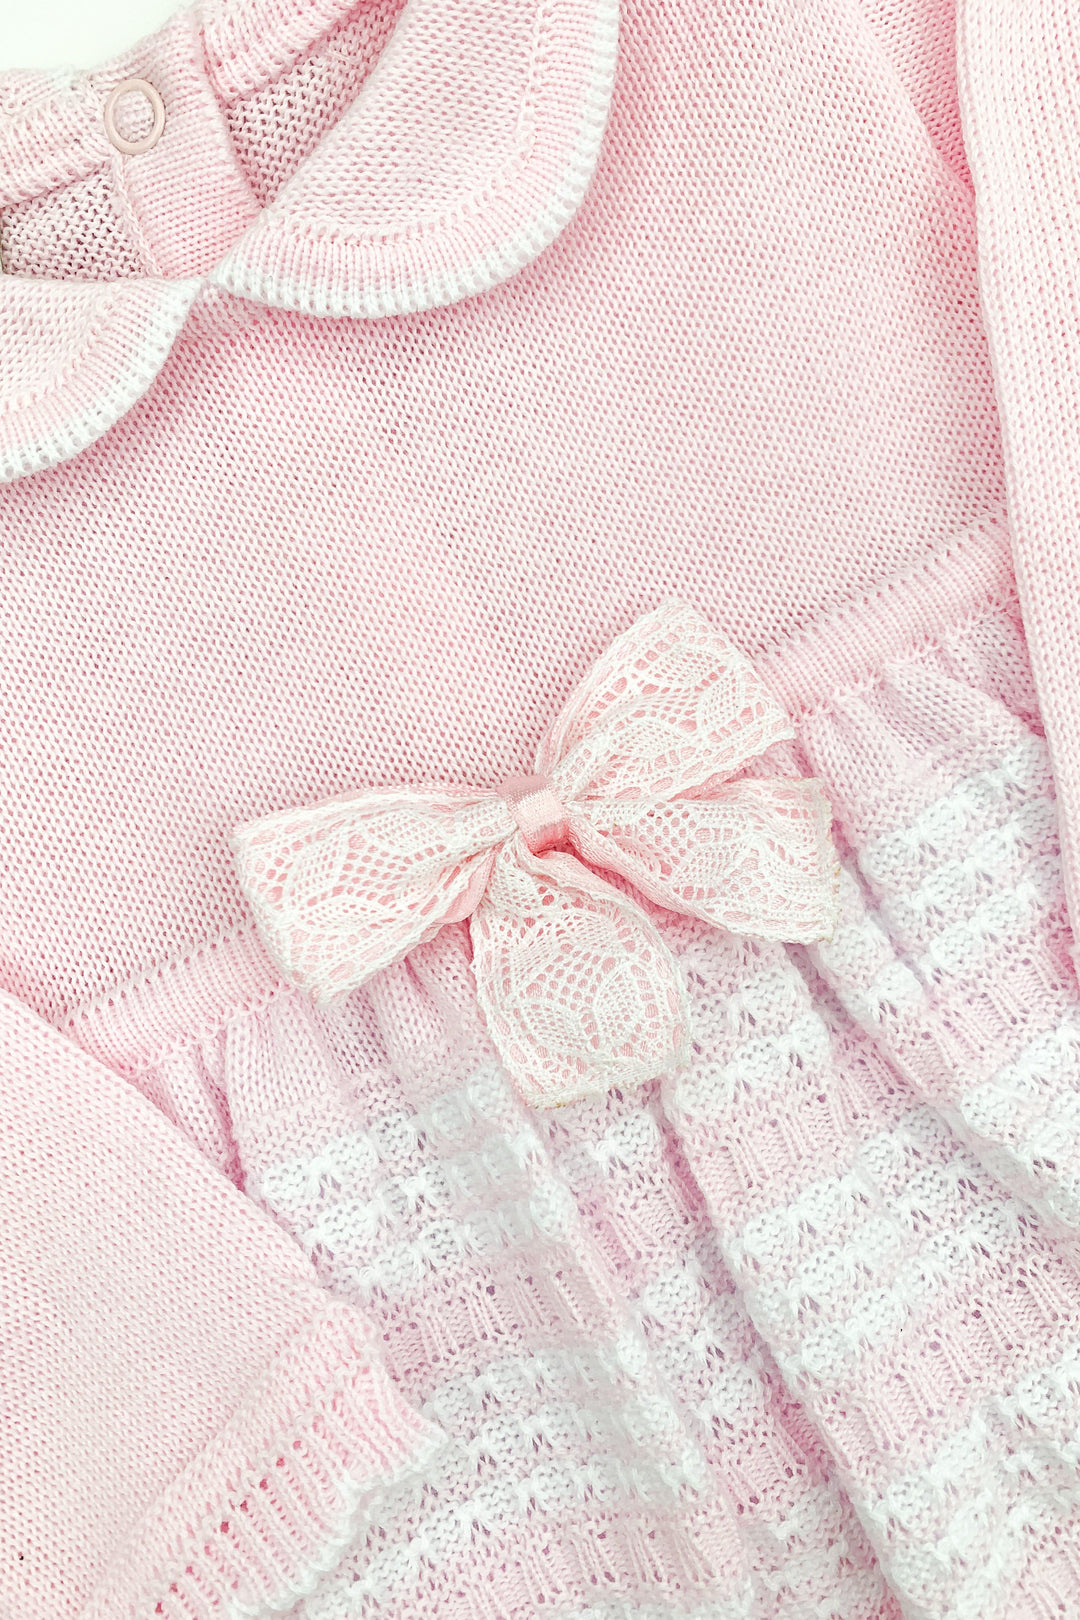 Pretty Originals "Paula" Pink Knitted Dress & Bloomers | Millie and John